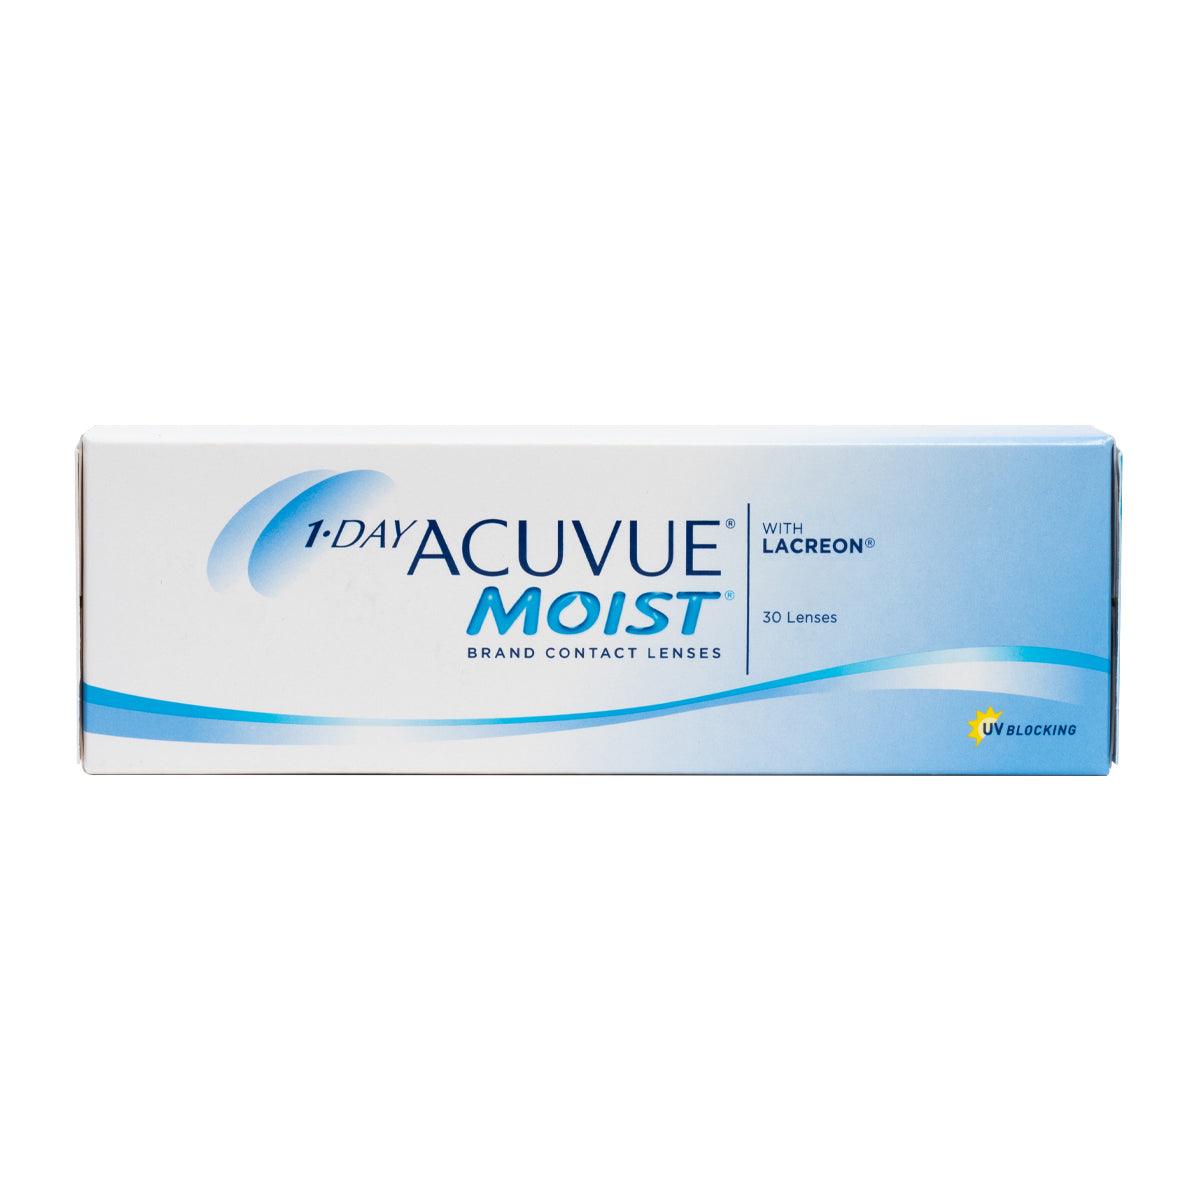 1-Day Acuvue Moist - TA-TO.com